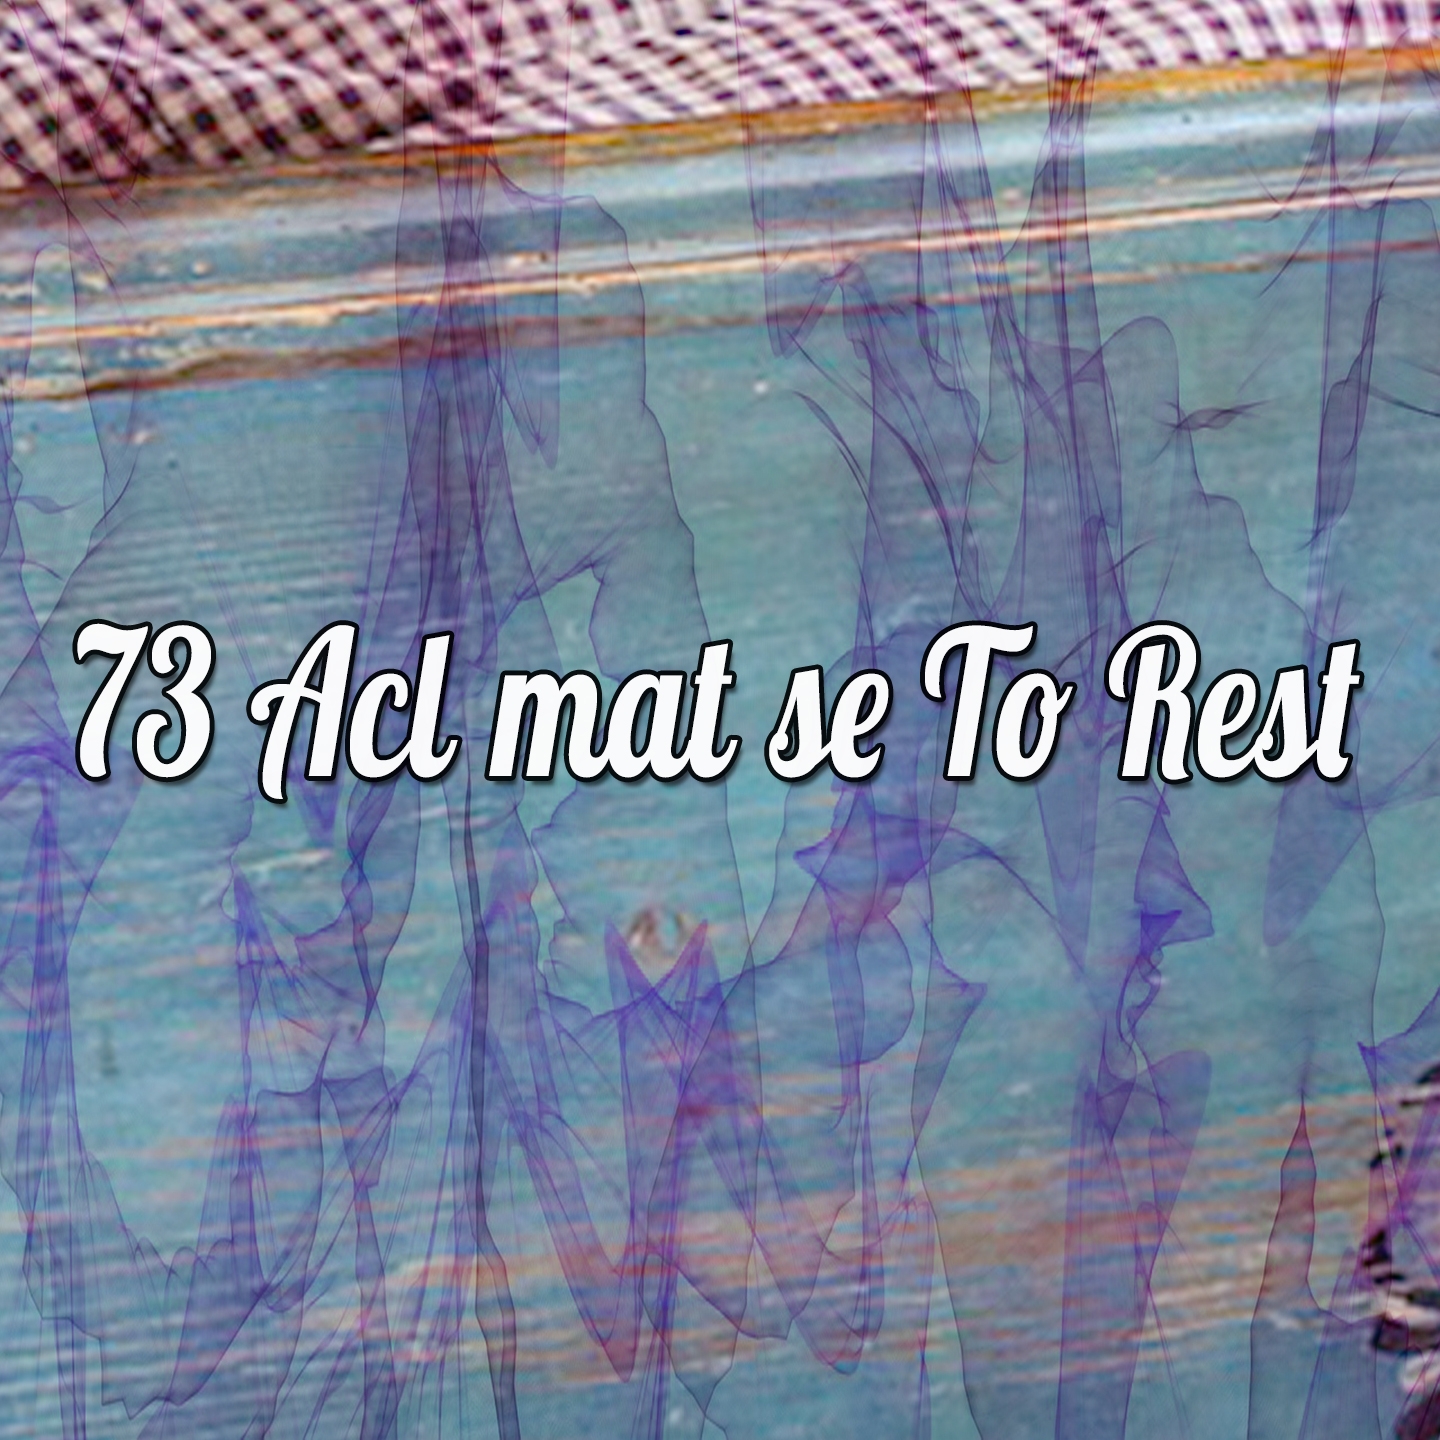 73 Aclimatise To Rest